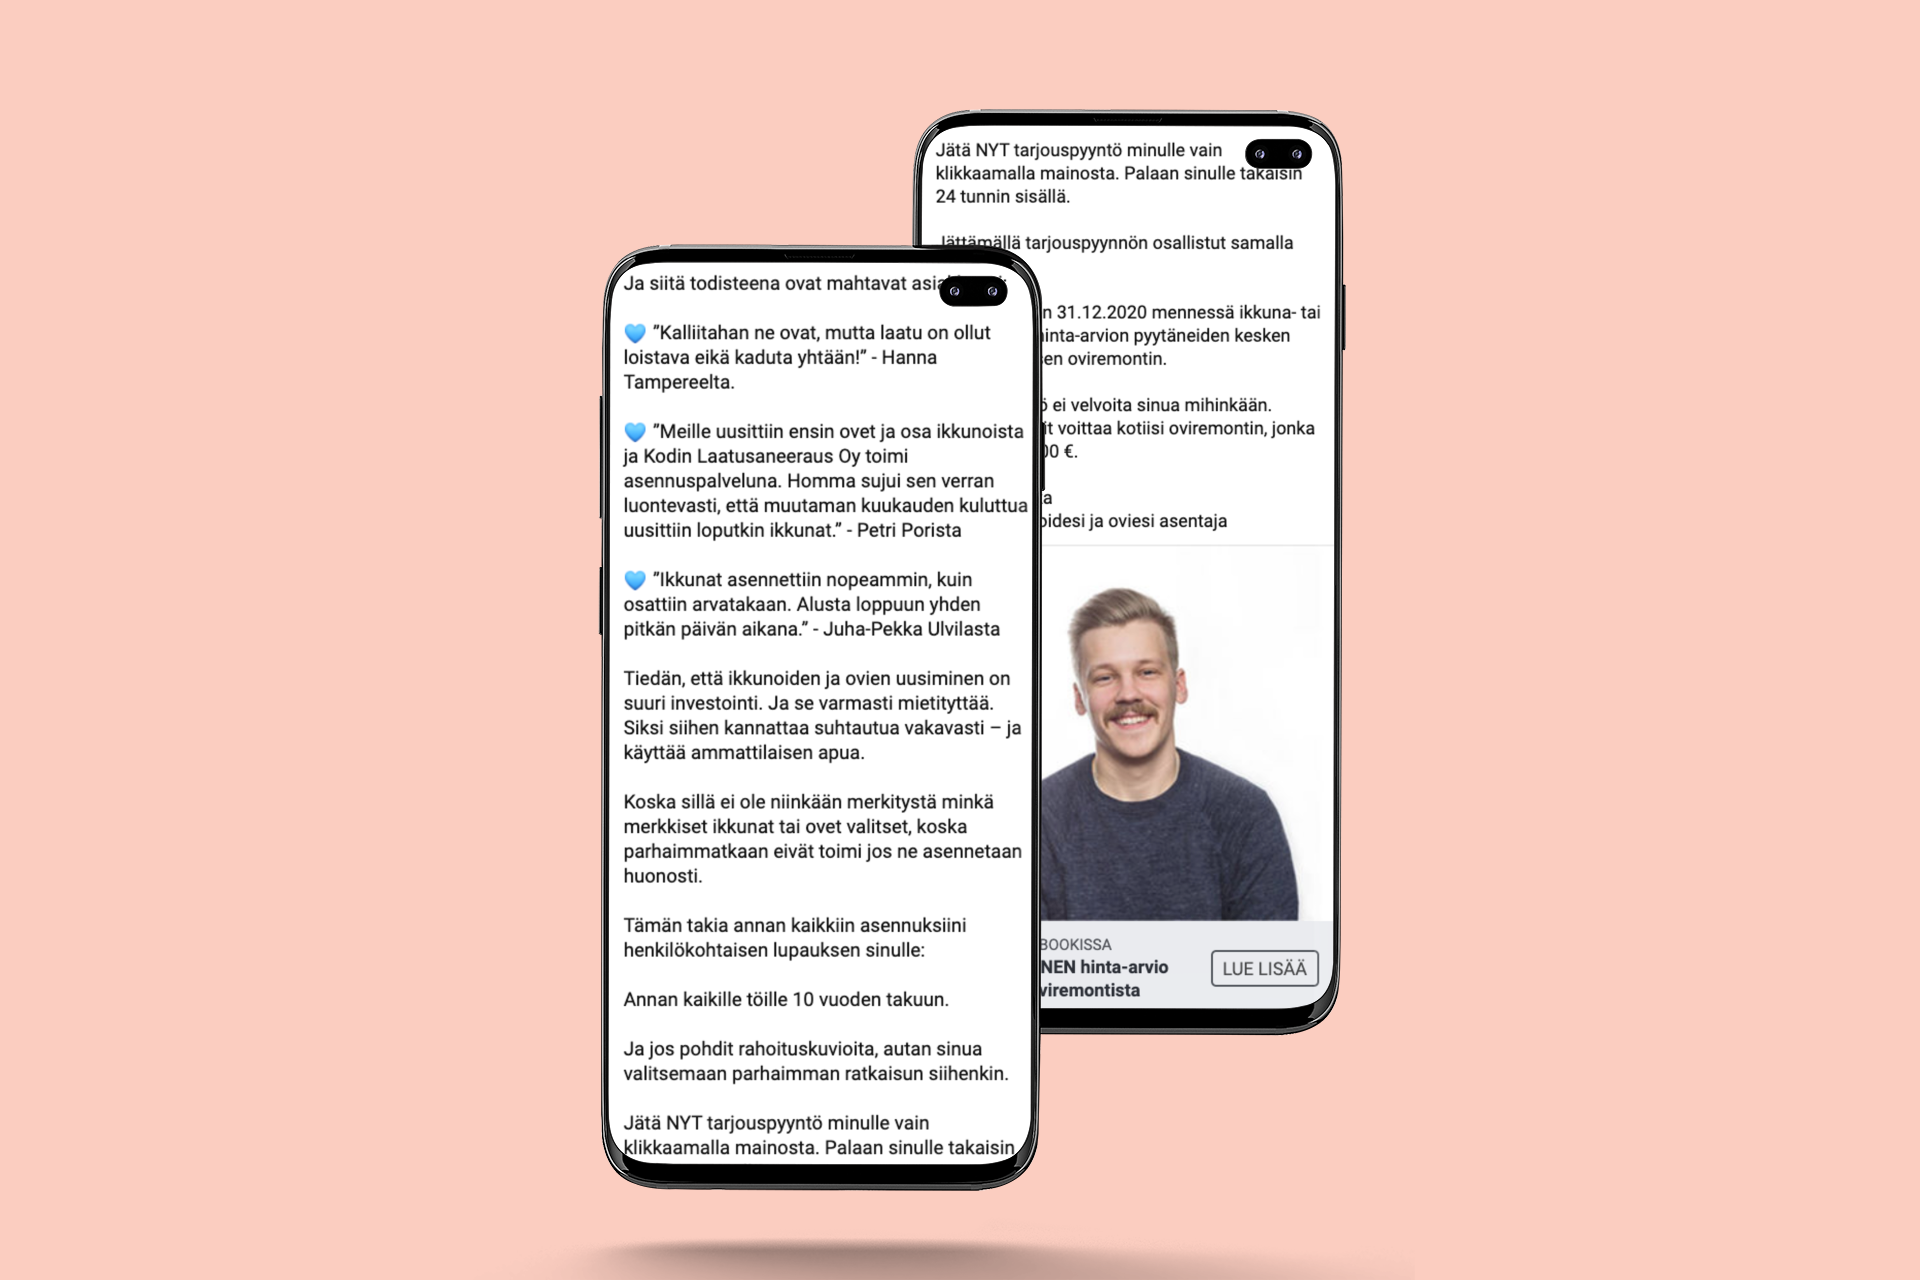 mockup-of-two-samsung-galaxy-s10-in-portrait-position-against-a-plain-backdrop-564-el (7).png